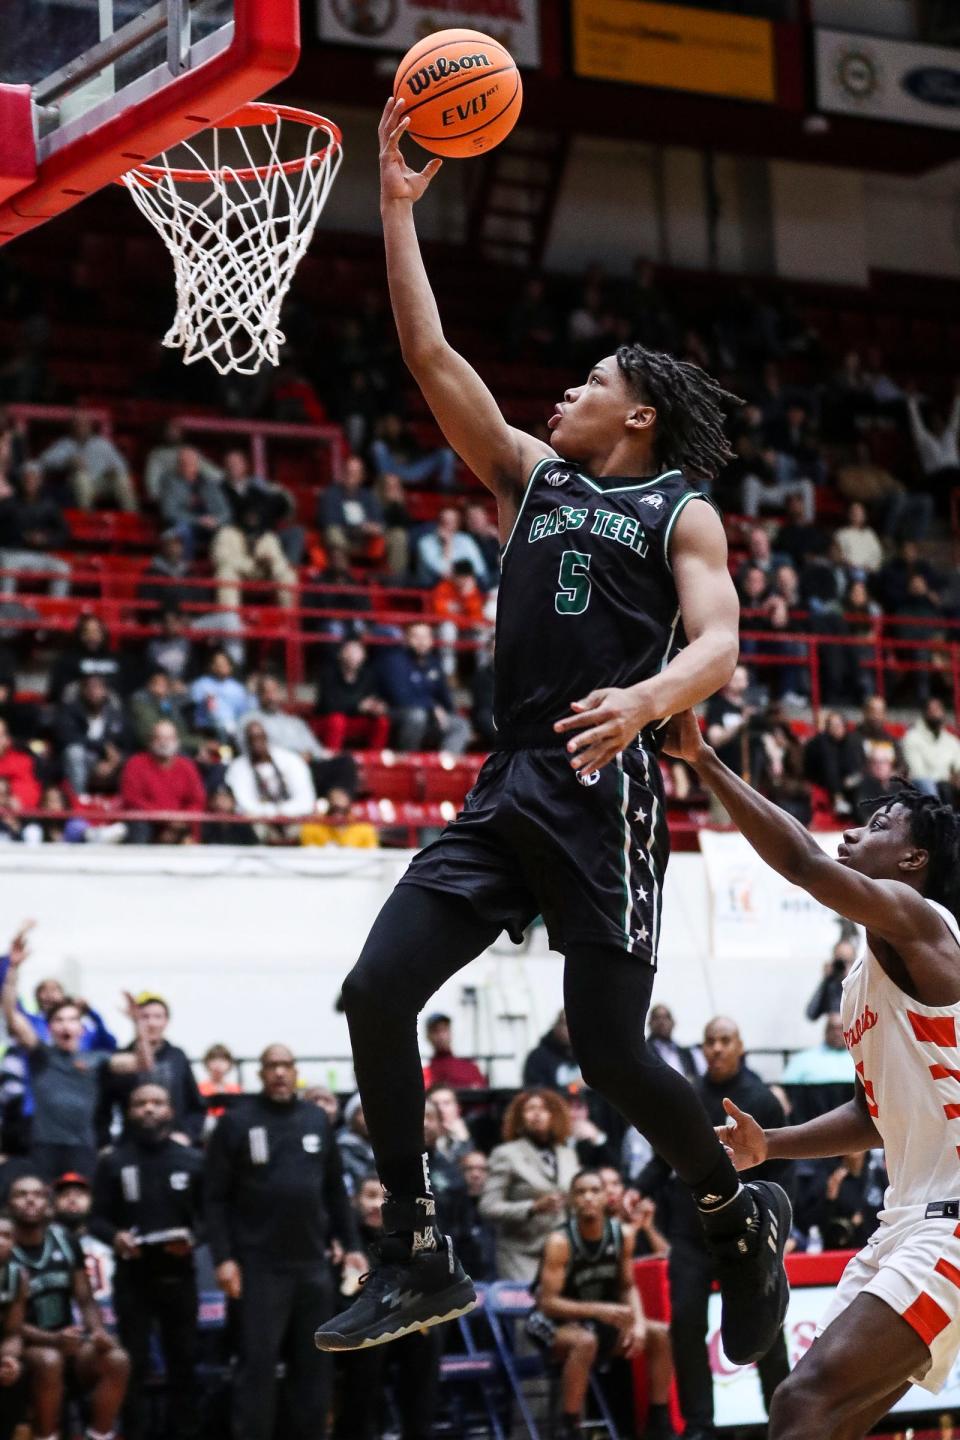 Detroit Cass Tech's Darius Acuff (5) makes a layup against  Birmingham Brother Rice during the second half at Calihan Hall in Detroit on Friday, March 3, 2023.